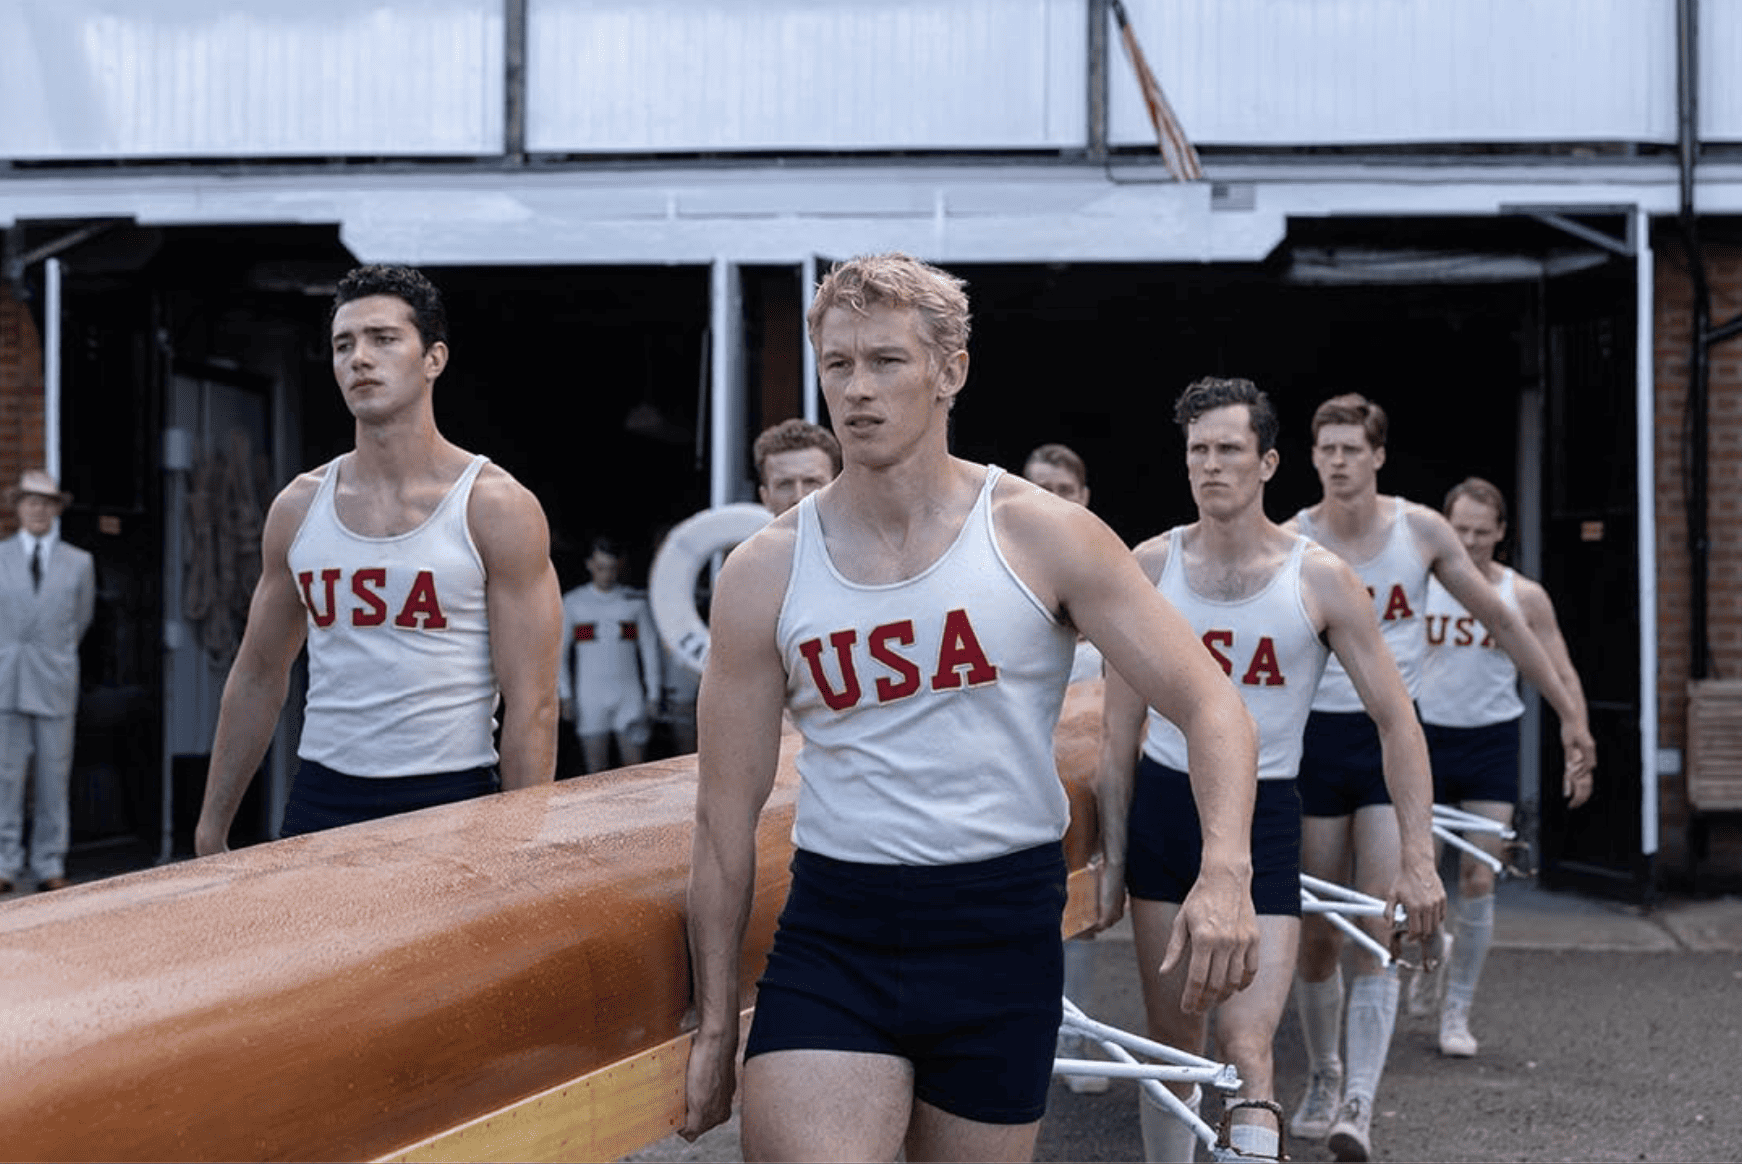 A group of young men in USA shirts carry a boat in this image from Metro-Goldwyn-Mayer.